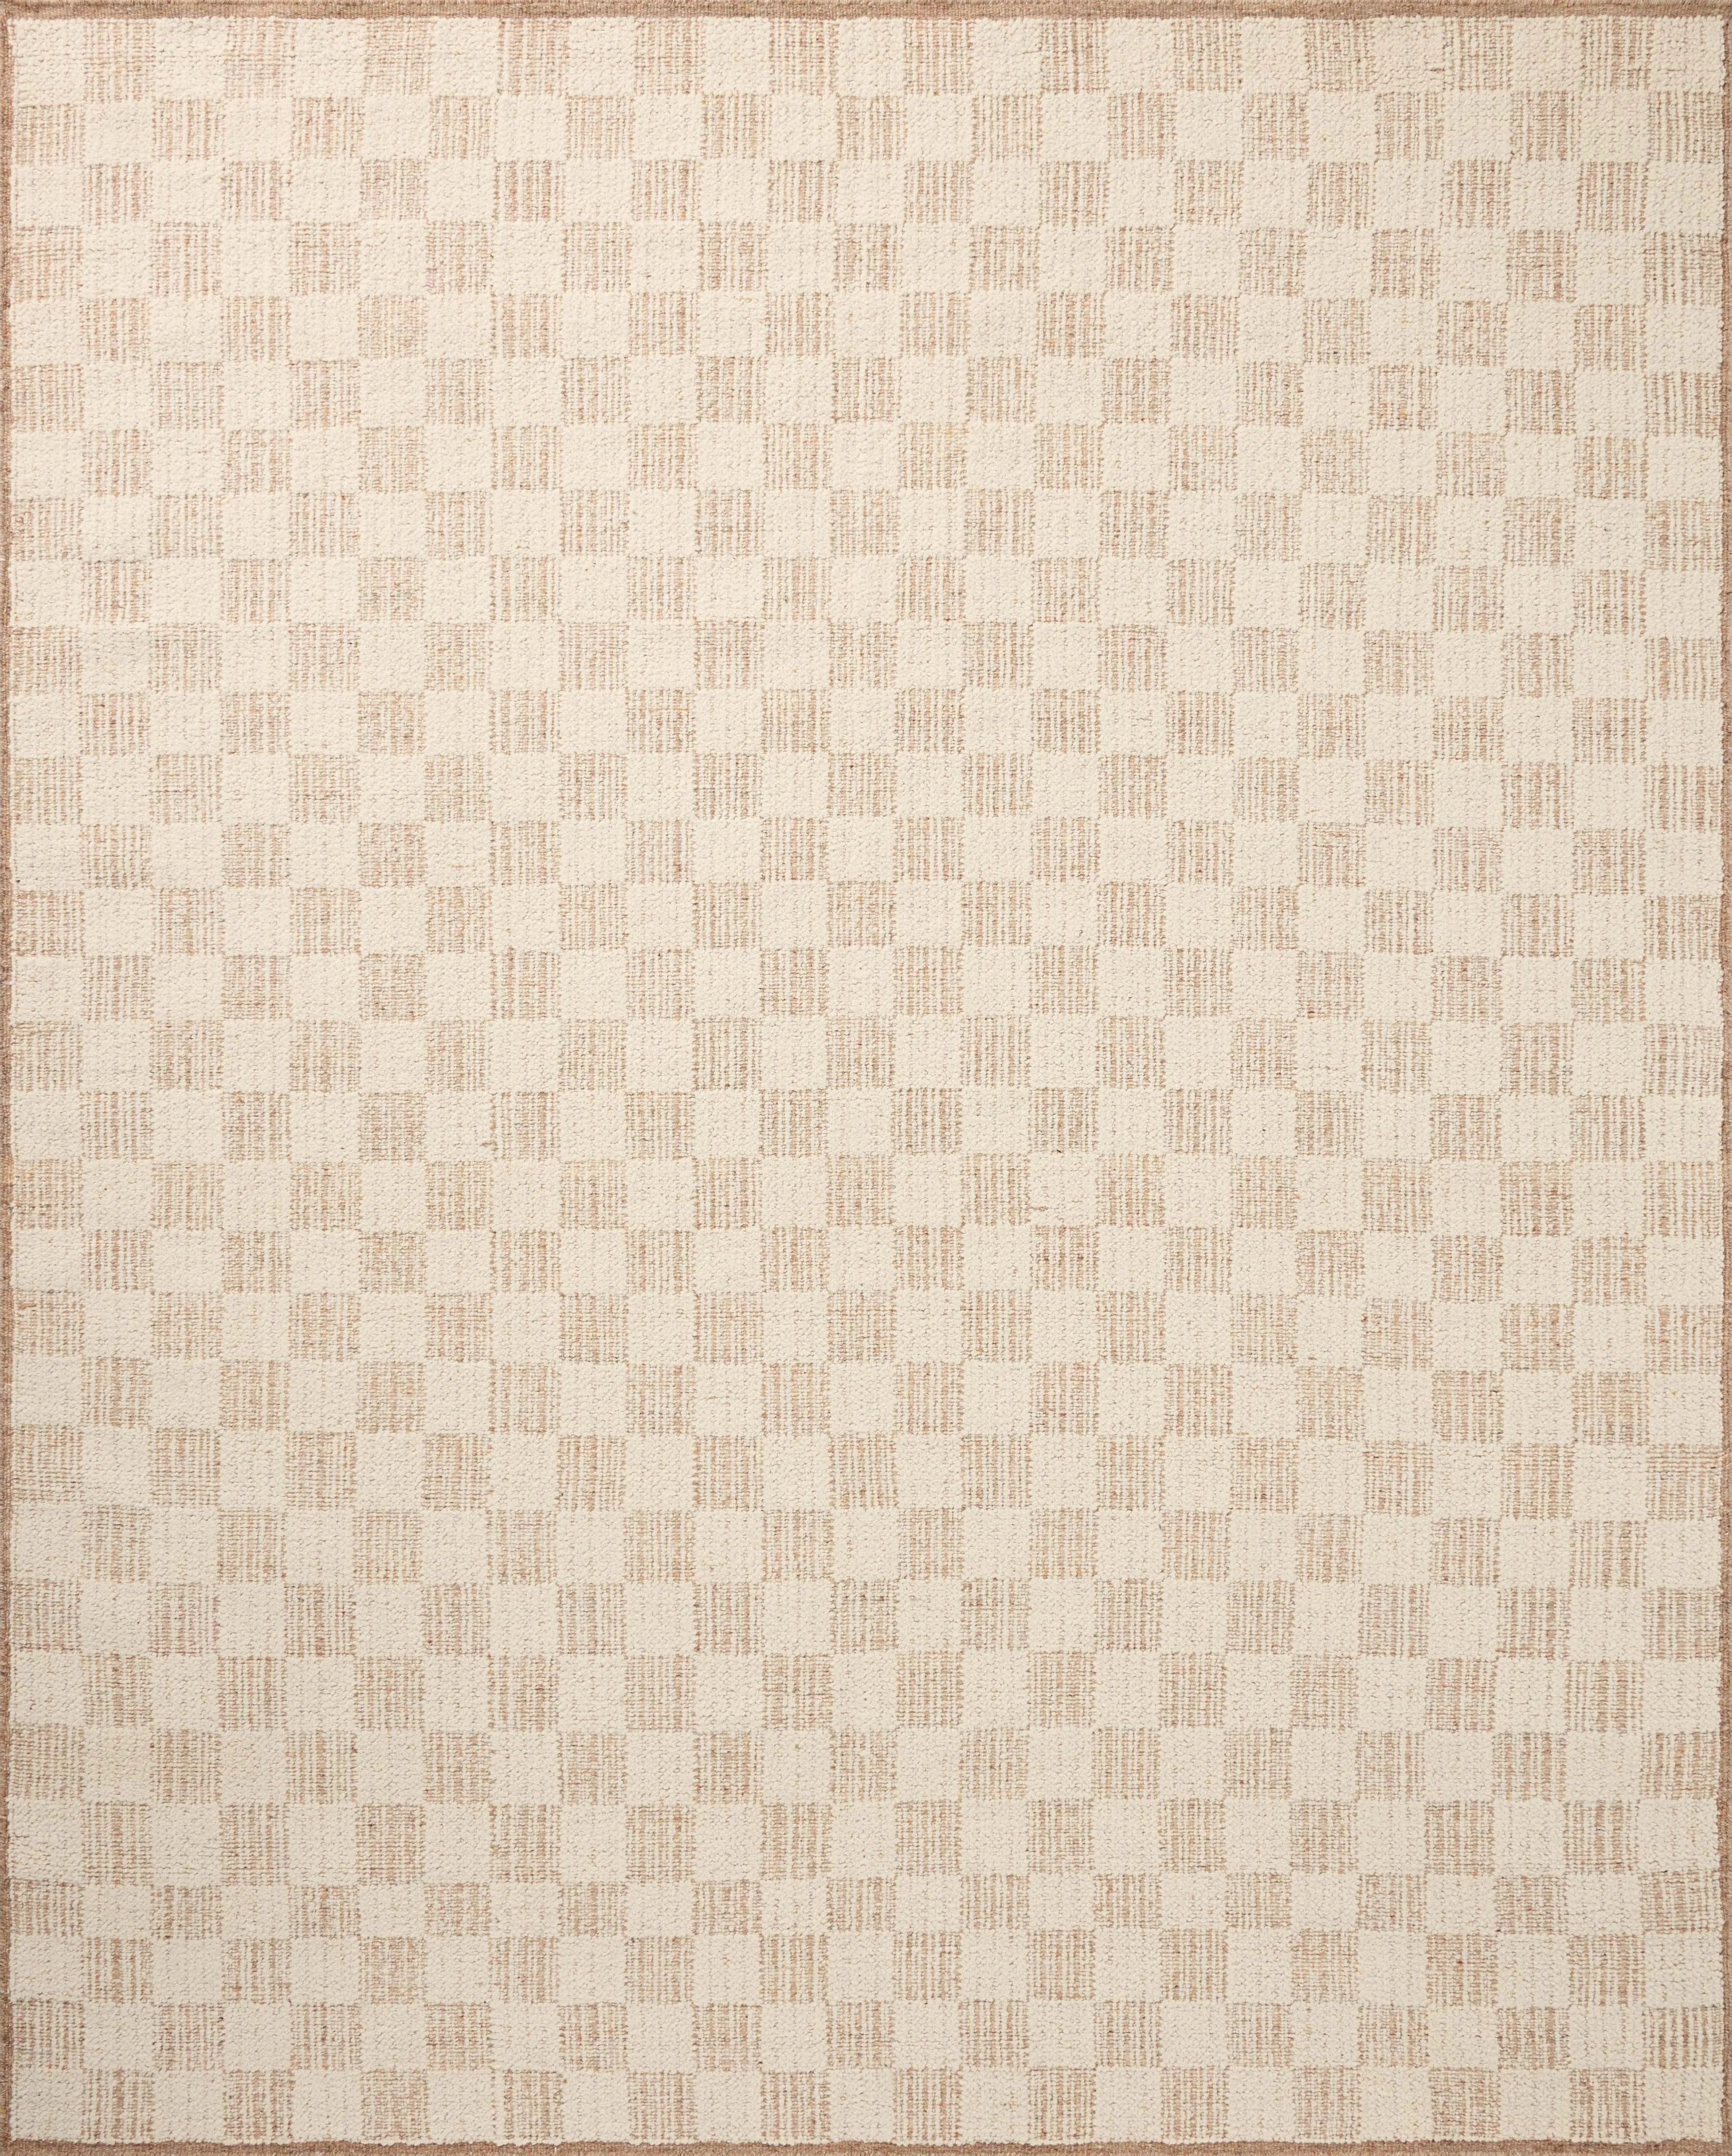 The Knox Ivory / Terracotta Rug by Brigette Romanek x Loloi is a handwoven area rug with a contemporary checkerboard pattern and a texture reminiscent of a luxurious knit sweater. Made of a blend of wool and cotton that plays with scale and texture, Knox is imbued with cozy luxury that can anchor any room. Amethyst Home provides interior design, new home construction design consulting, vintage area rugs, and lighting in the Alpharetta metro area.